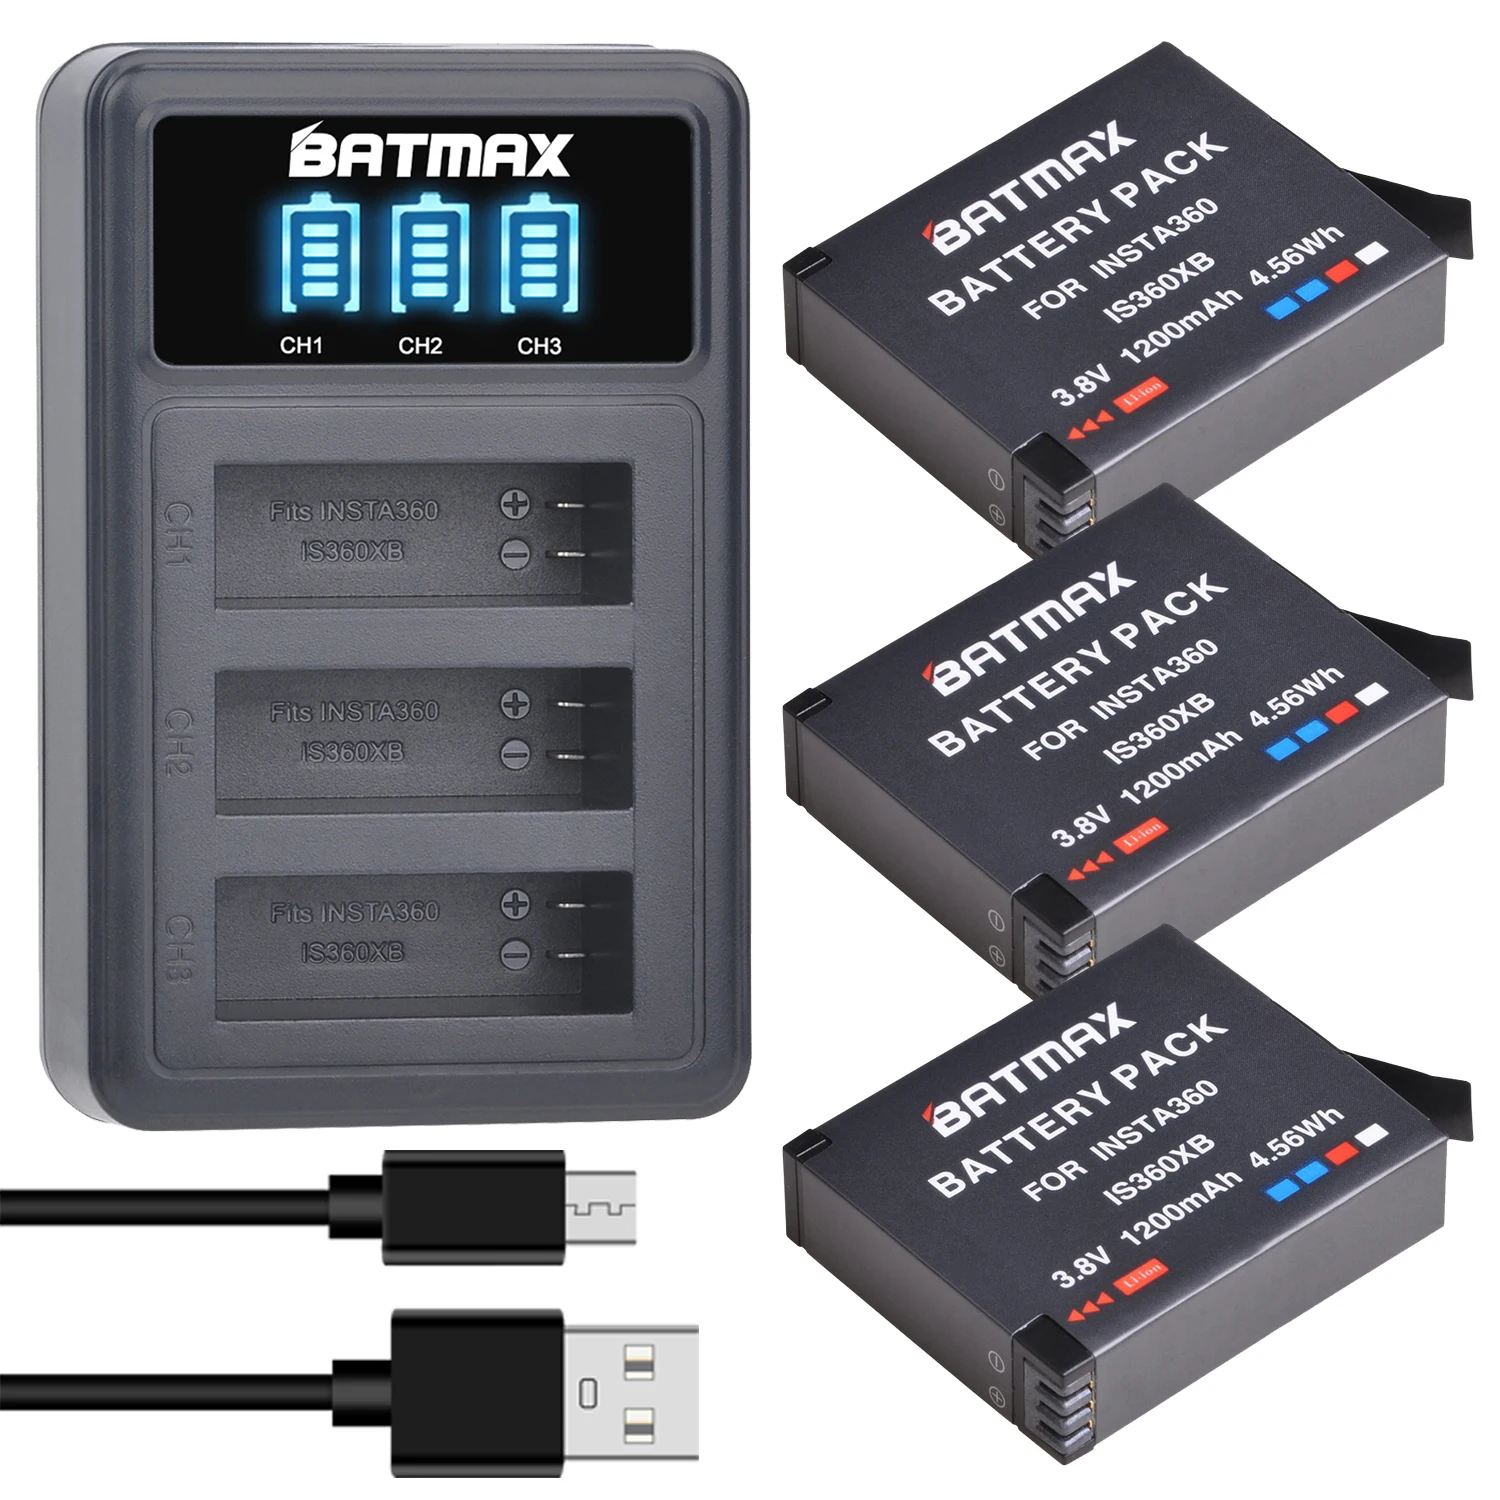 

Batmax 1200mAh Insta360 One X Camera Battery IS360XB Replacement Battery + LED USB 3-Slots Charger with Micro USB Charge Port